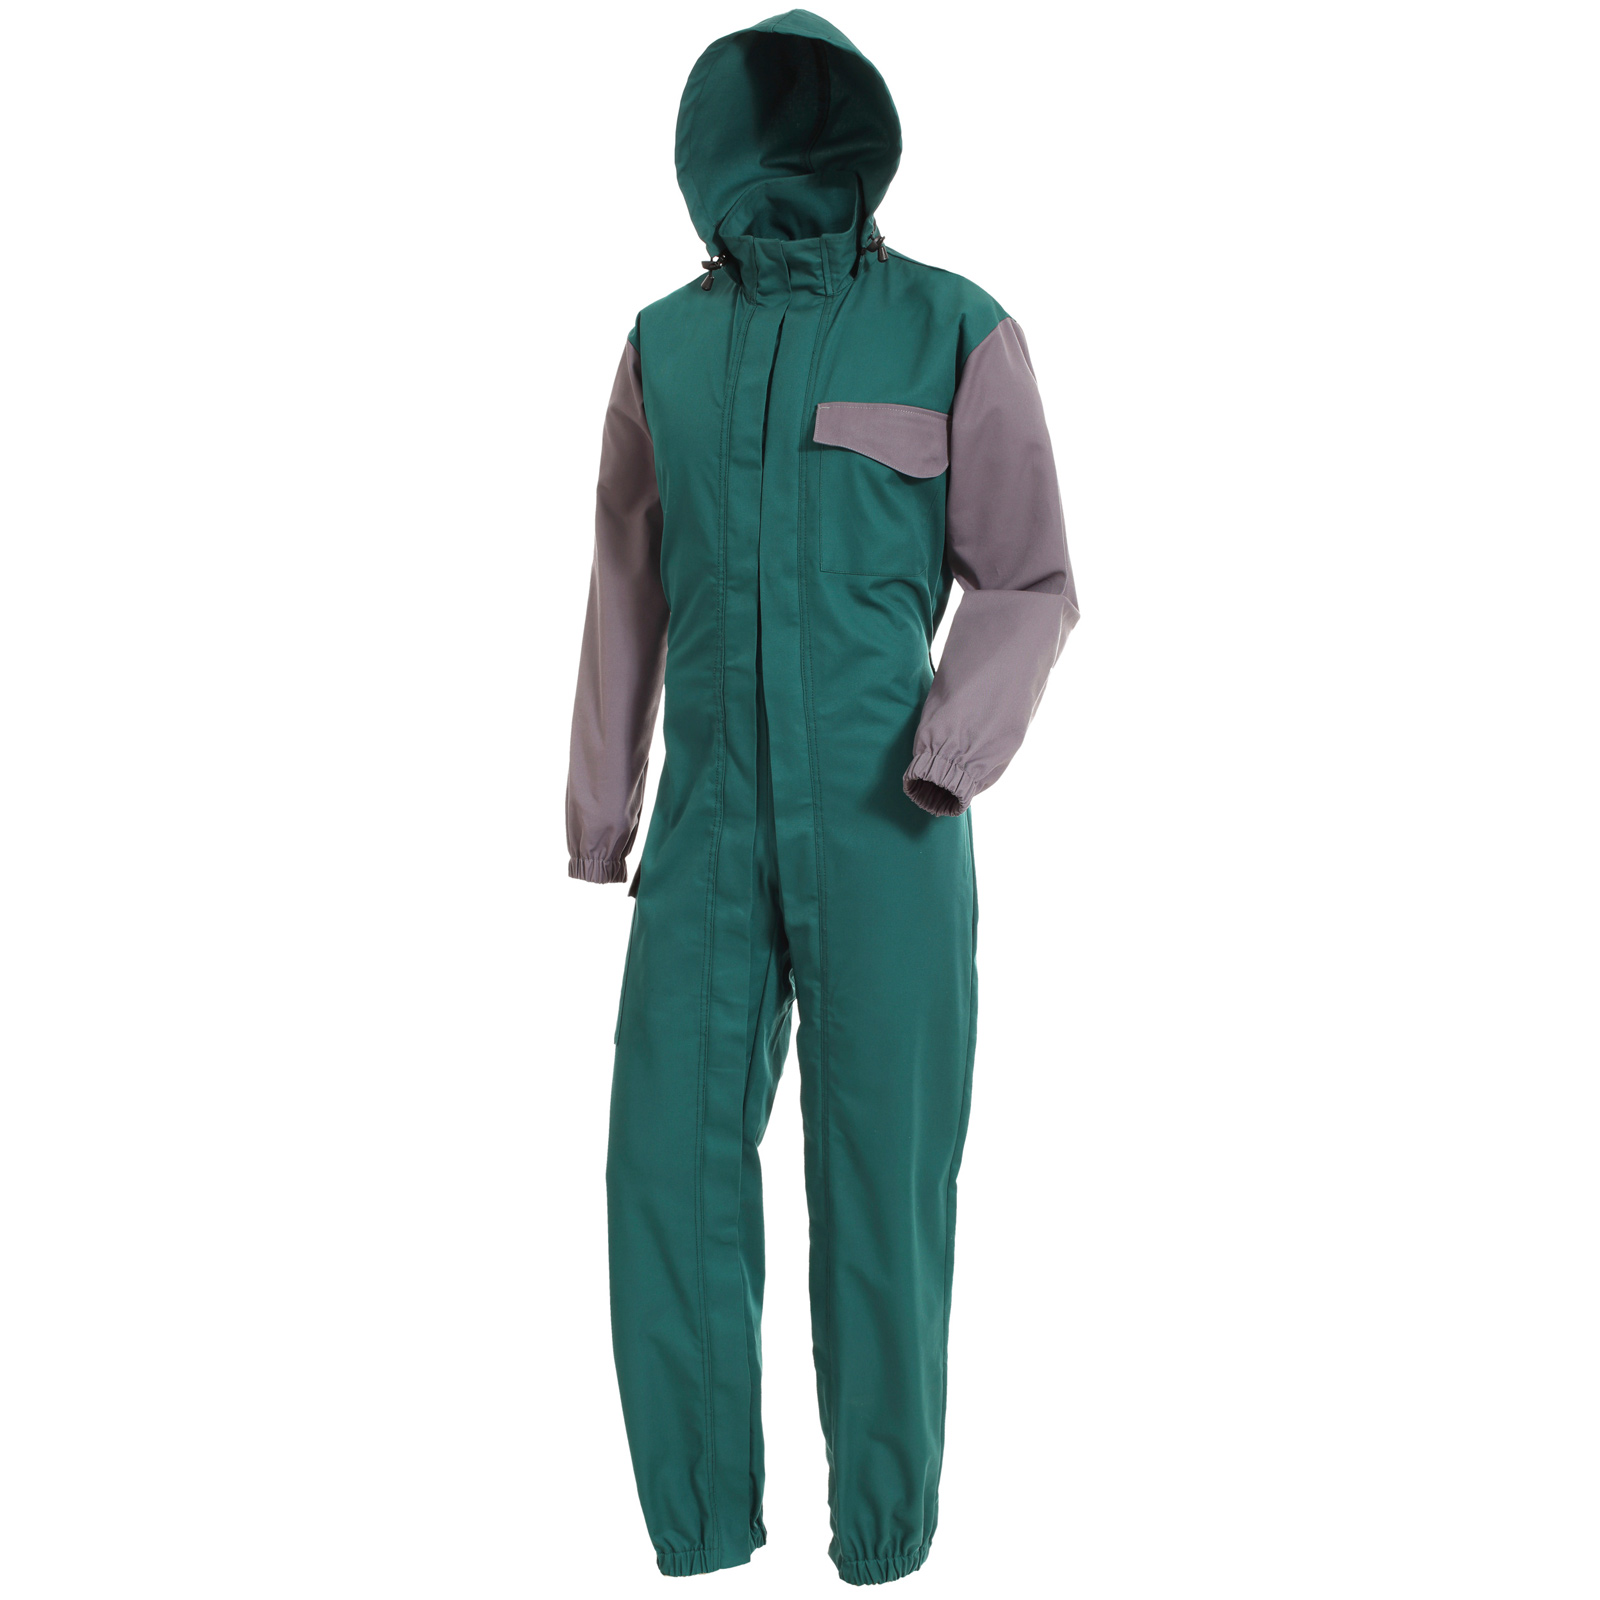 Plant protection overall Aegis green-grey L